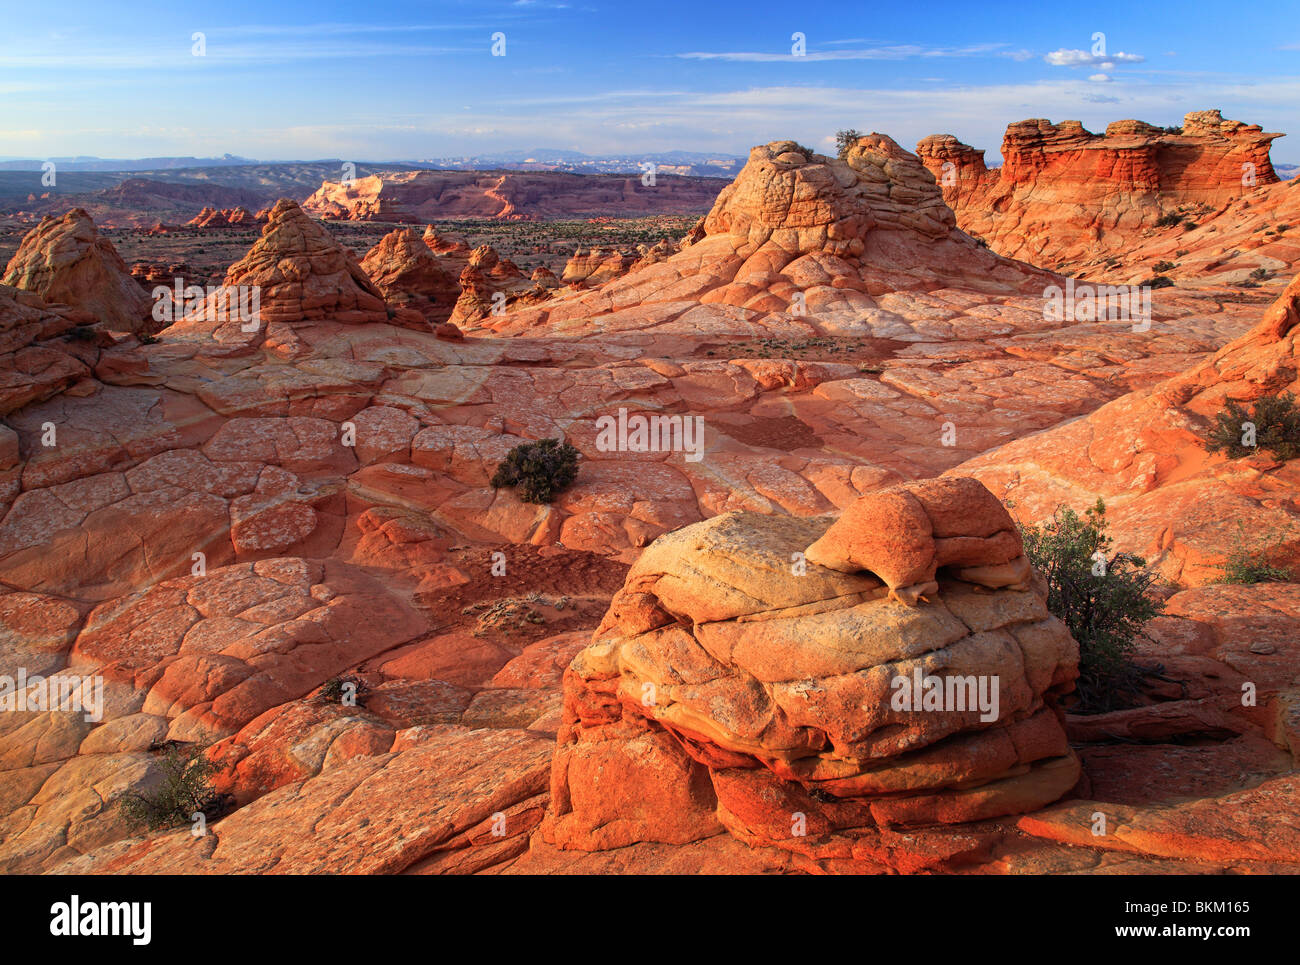 Rock formations in the Vermilion Cliffs National Monument, Arizona Stock Photo